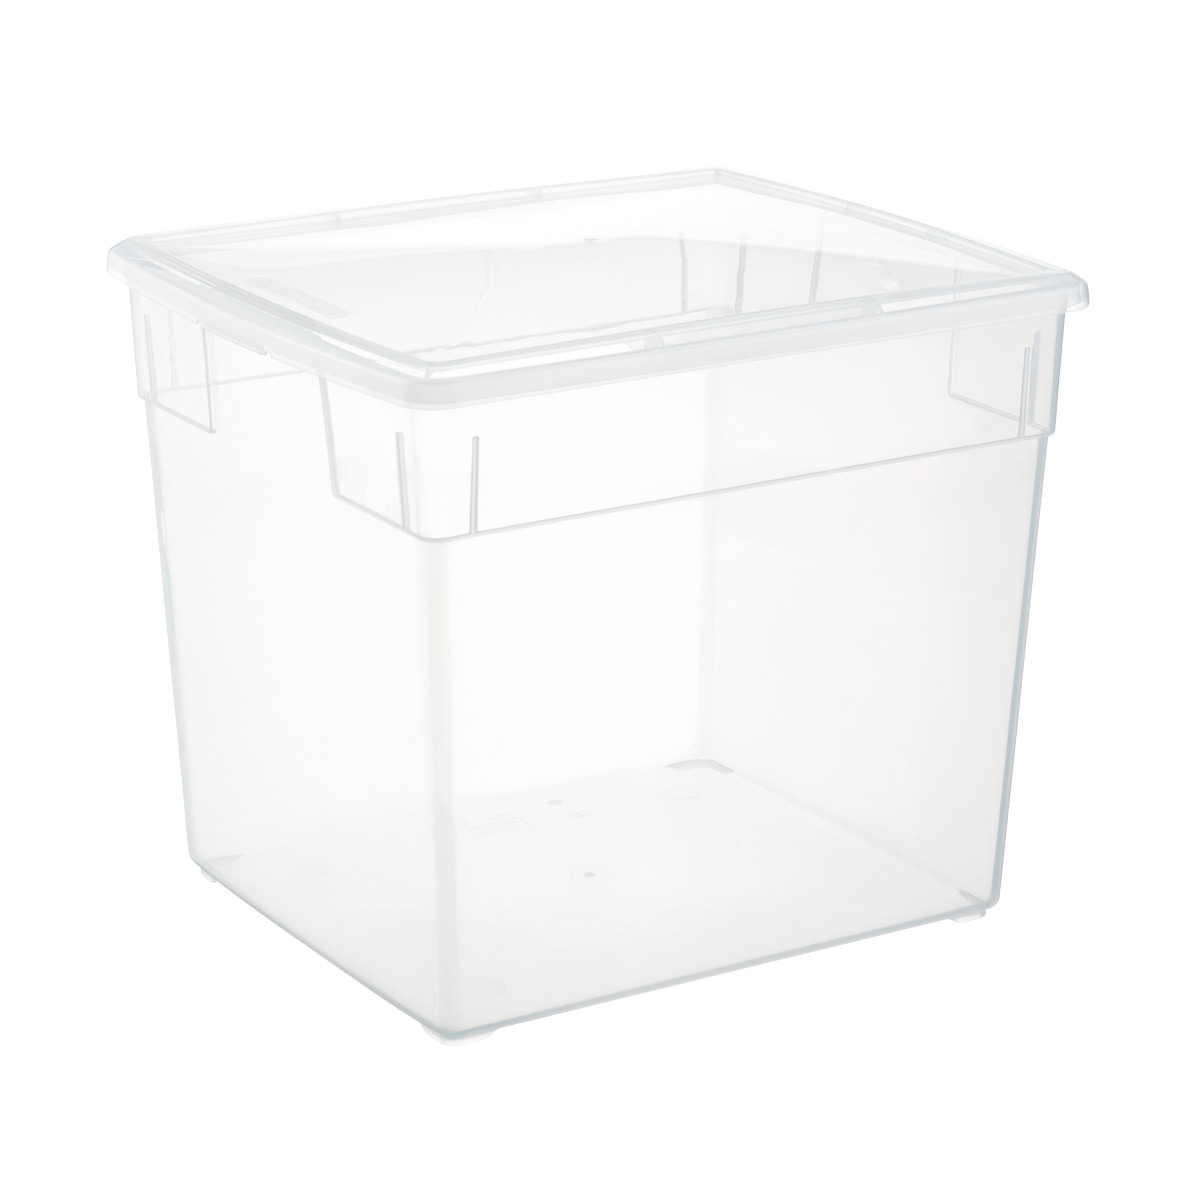 The Container Store Our Deep Sweater Box - 15-5/8 x 13-1/8 x 13-1/4 H - Each